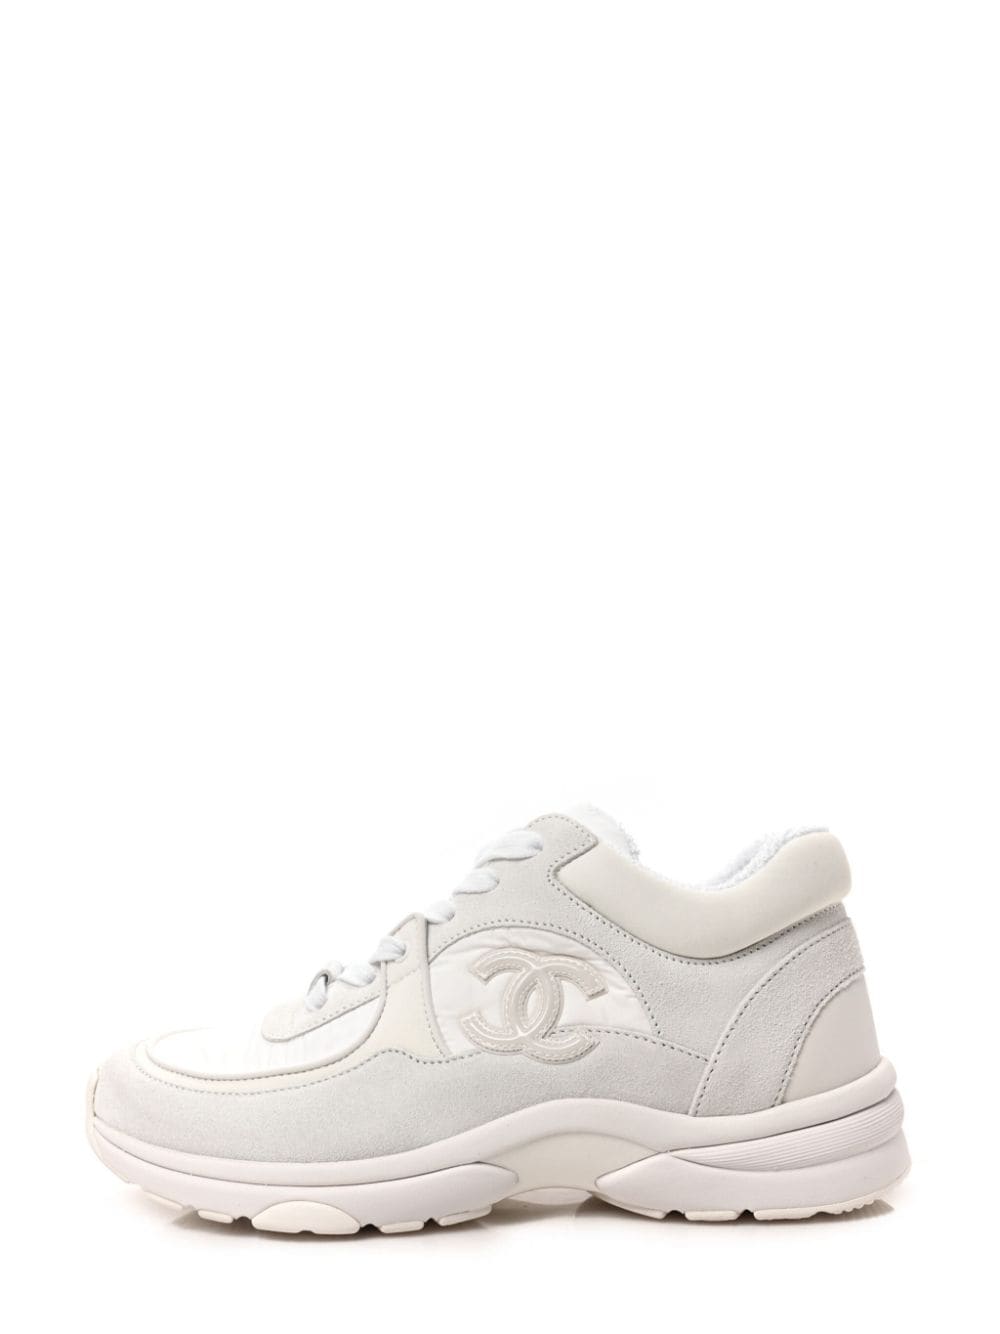 CHANEL Pre-Owned CC suede panelled sneakers - White